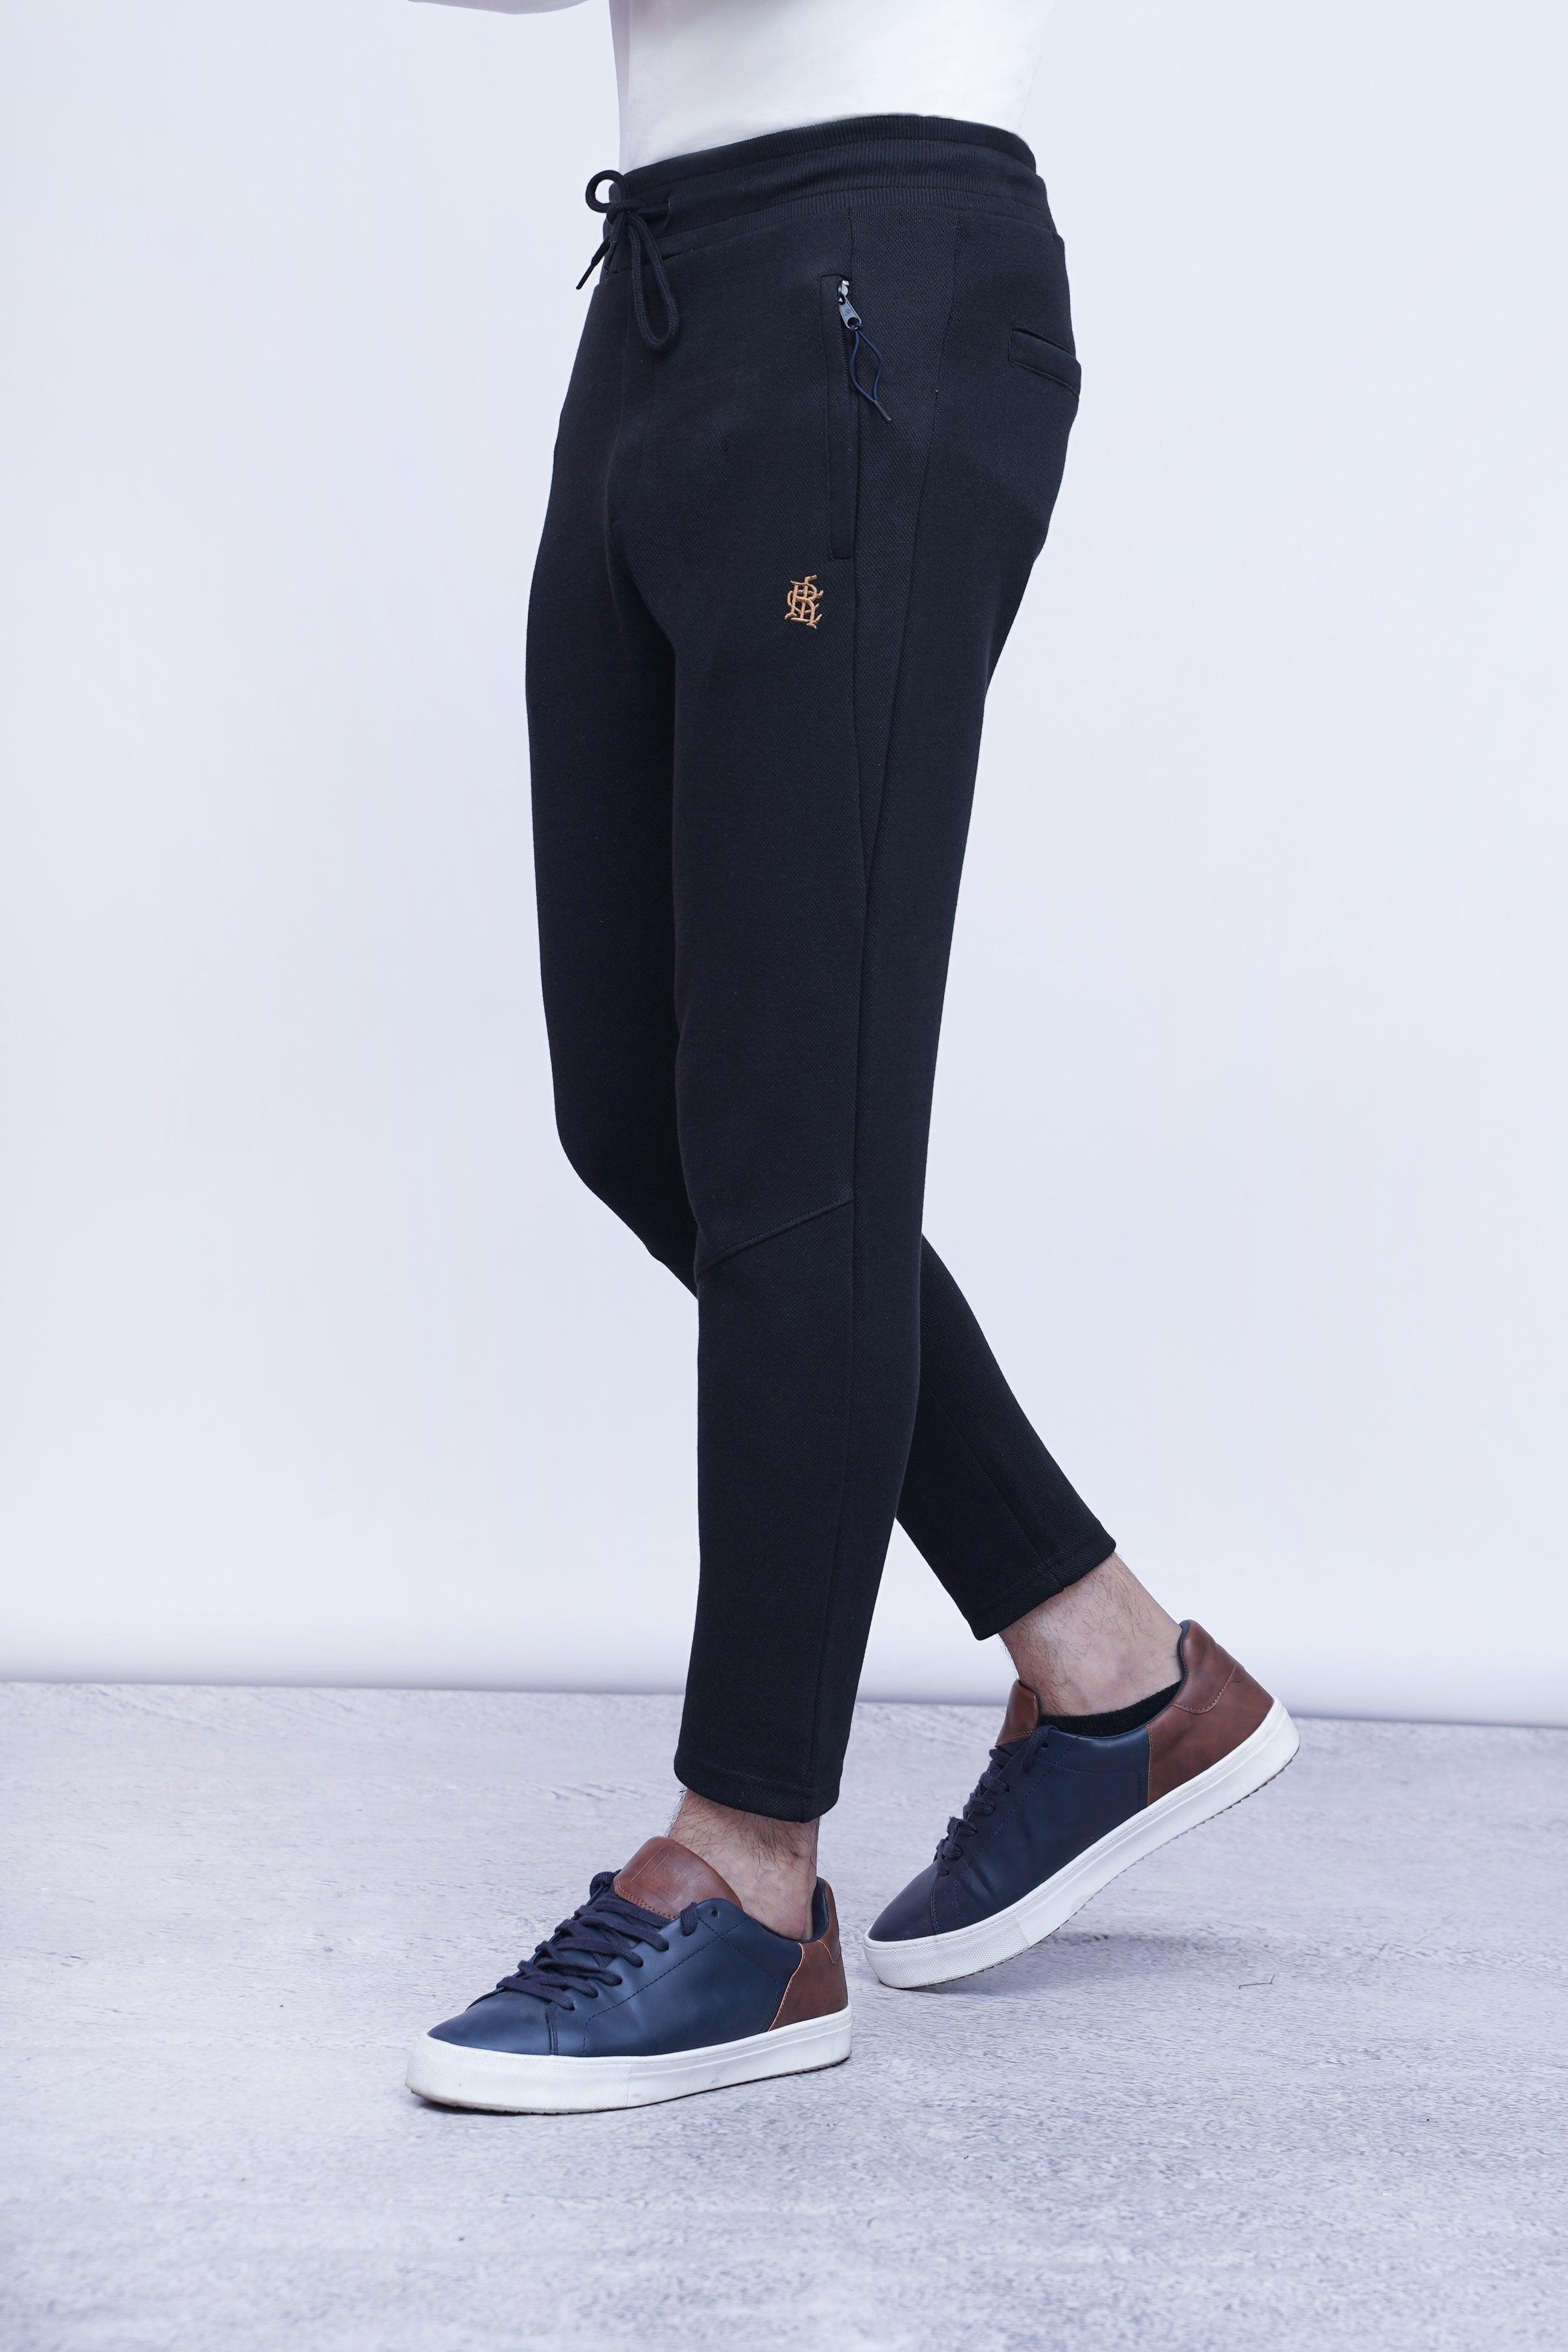 JUMBO PIQUE TROUSER BLACK at Charcoal Clothing